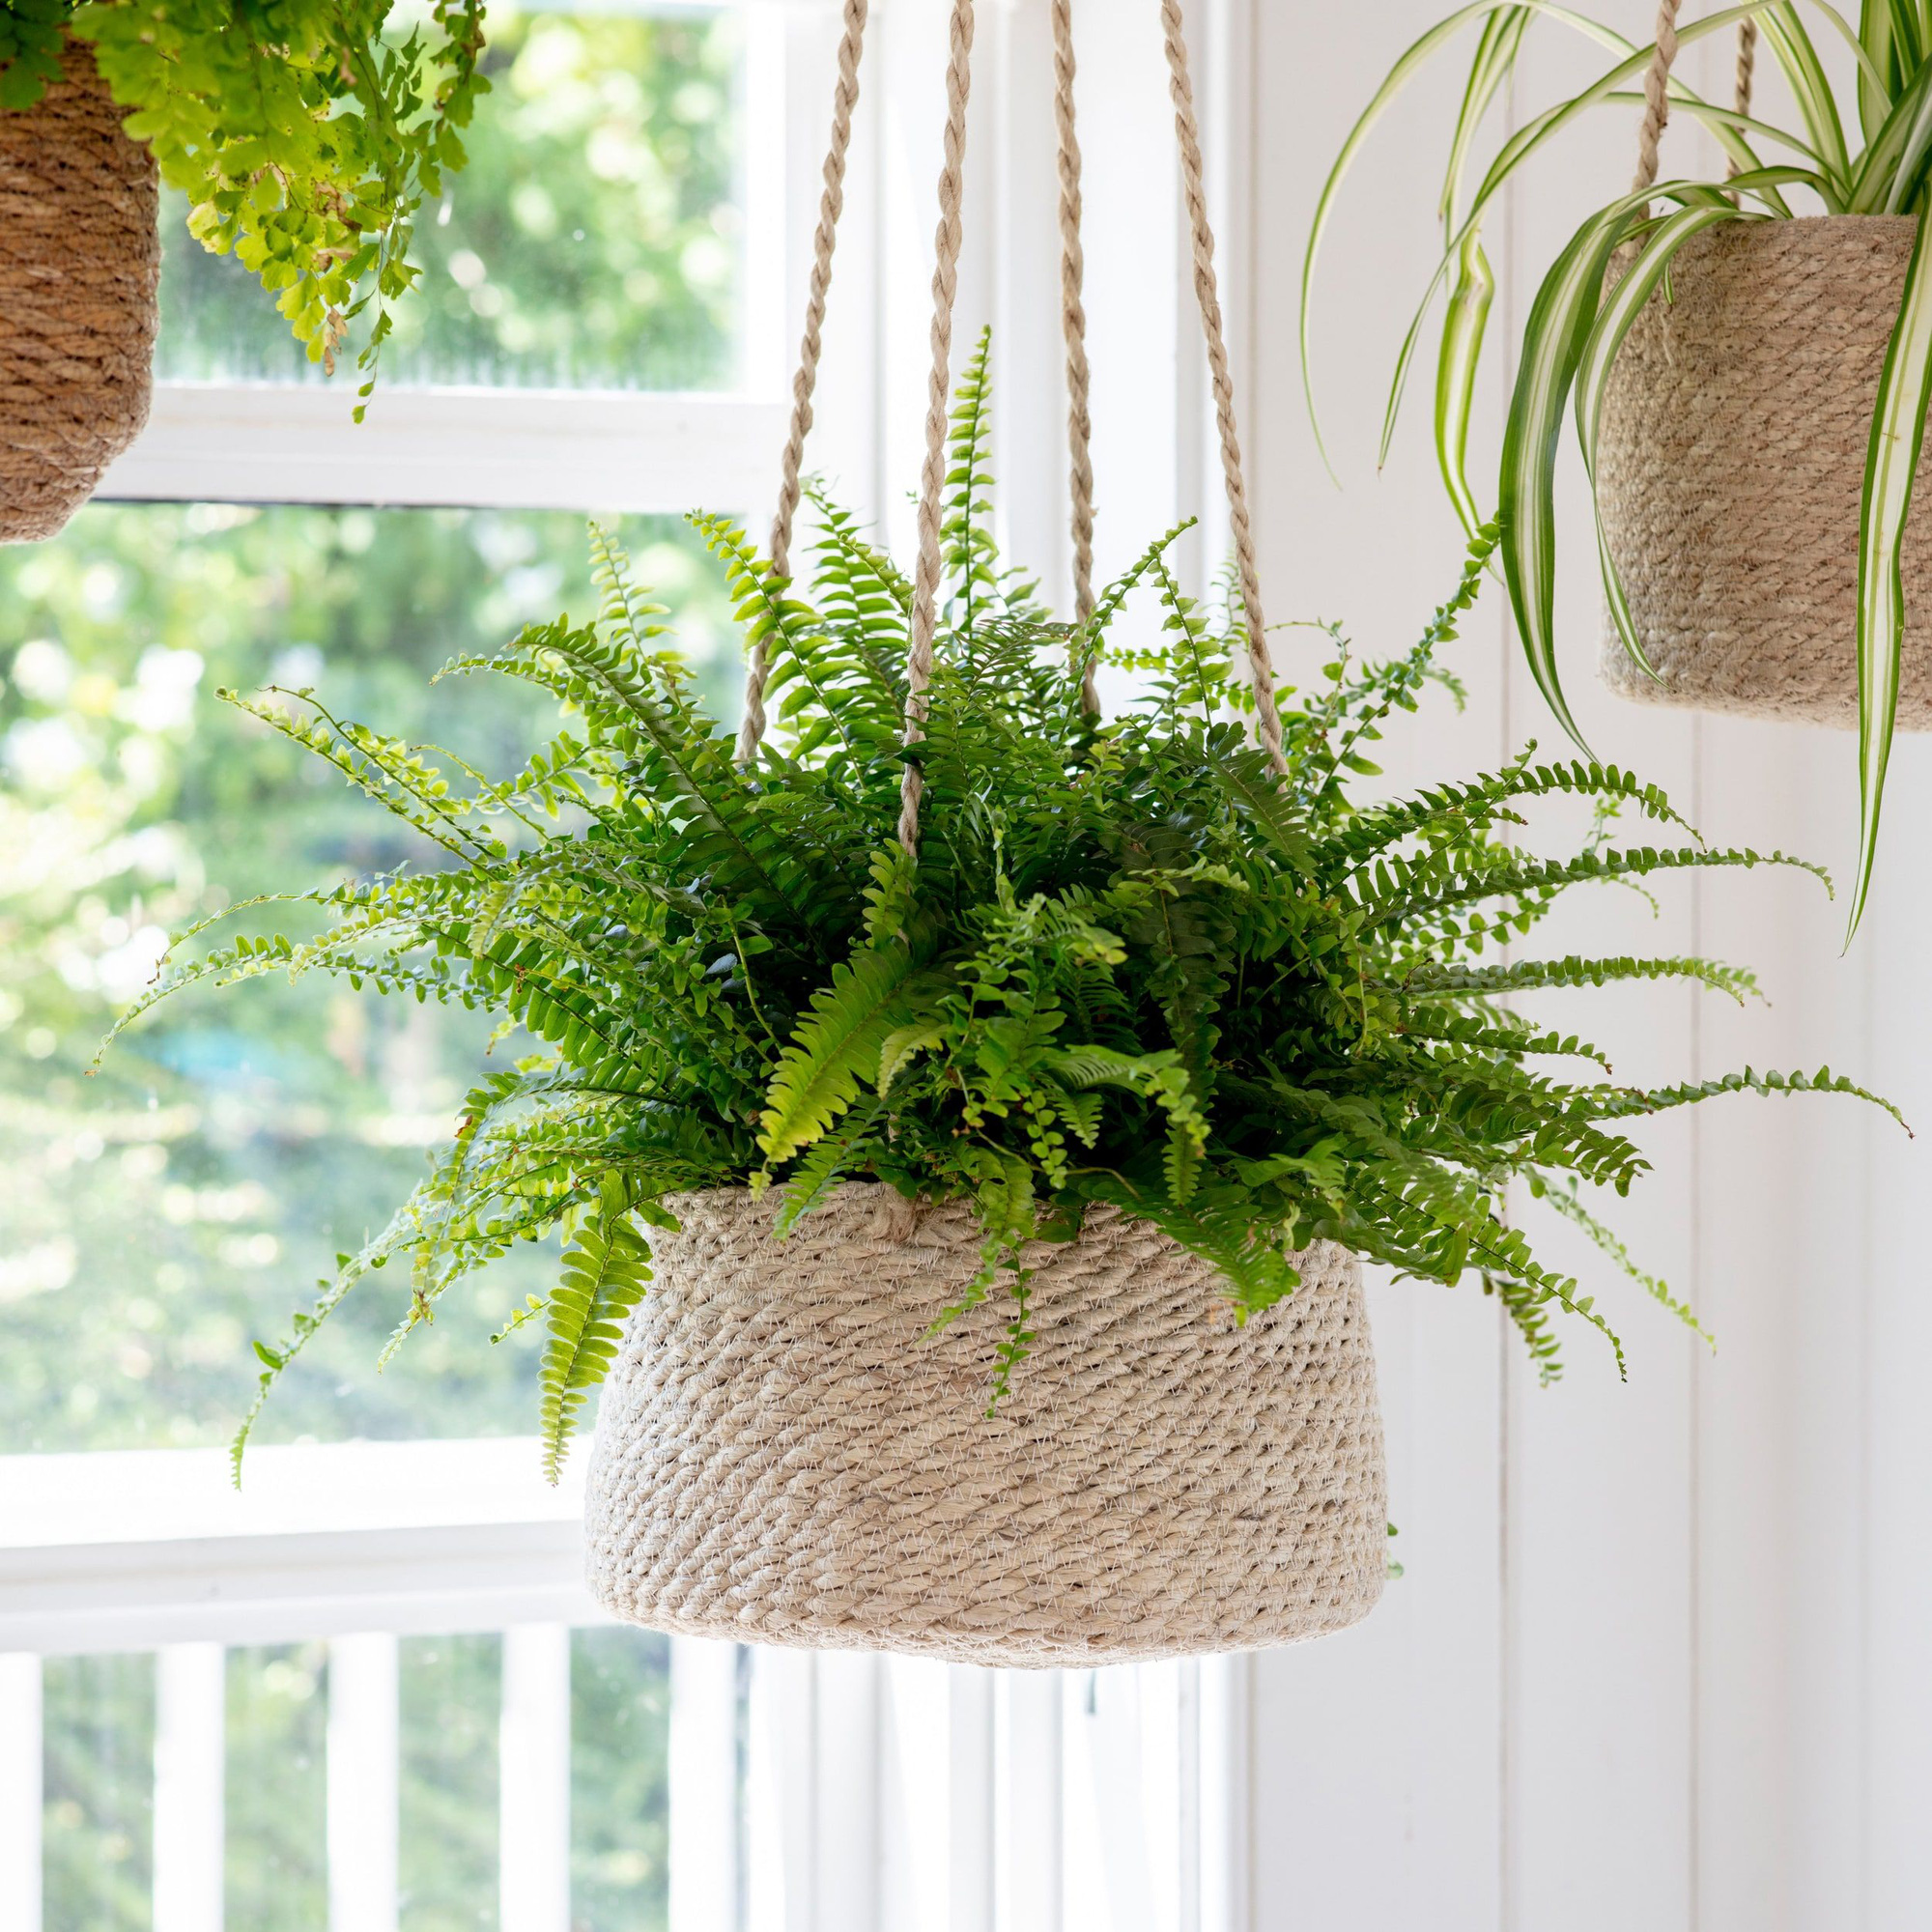 If your house is tight, don't worry because there are 6 types of hanging plants for you to choose from - Photo 6.